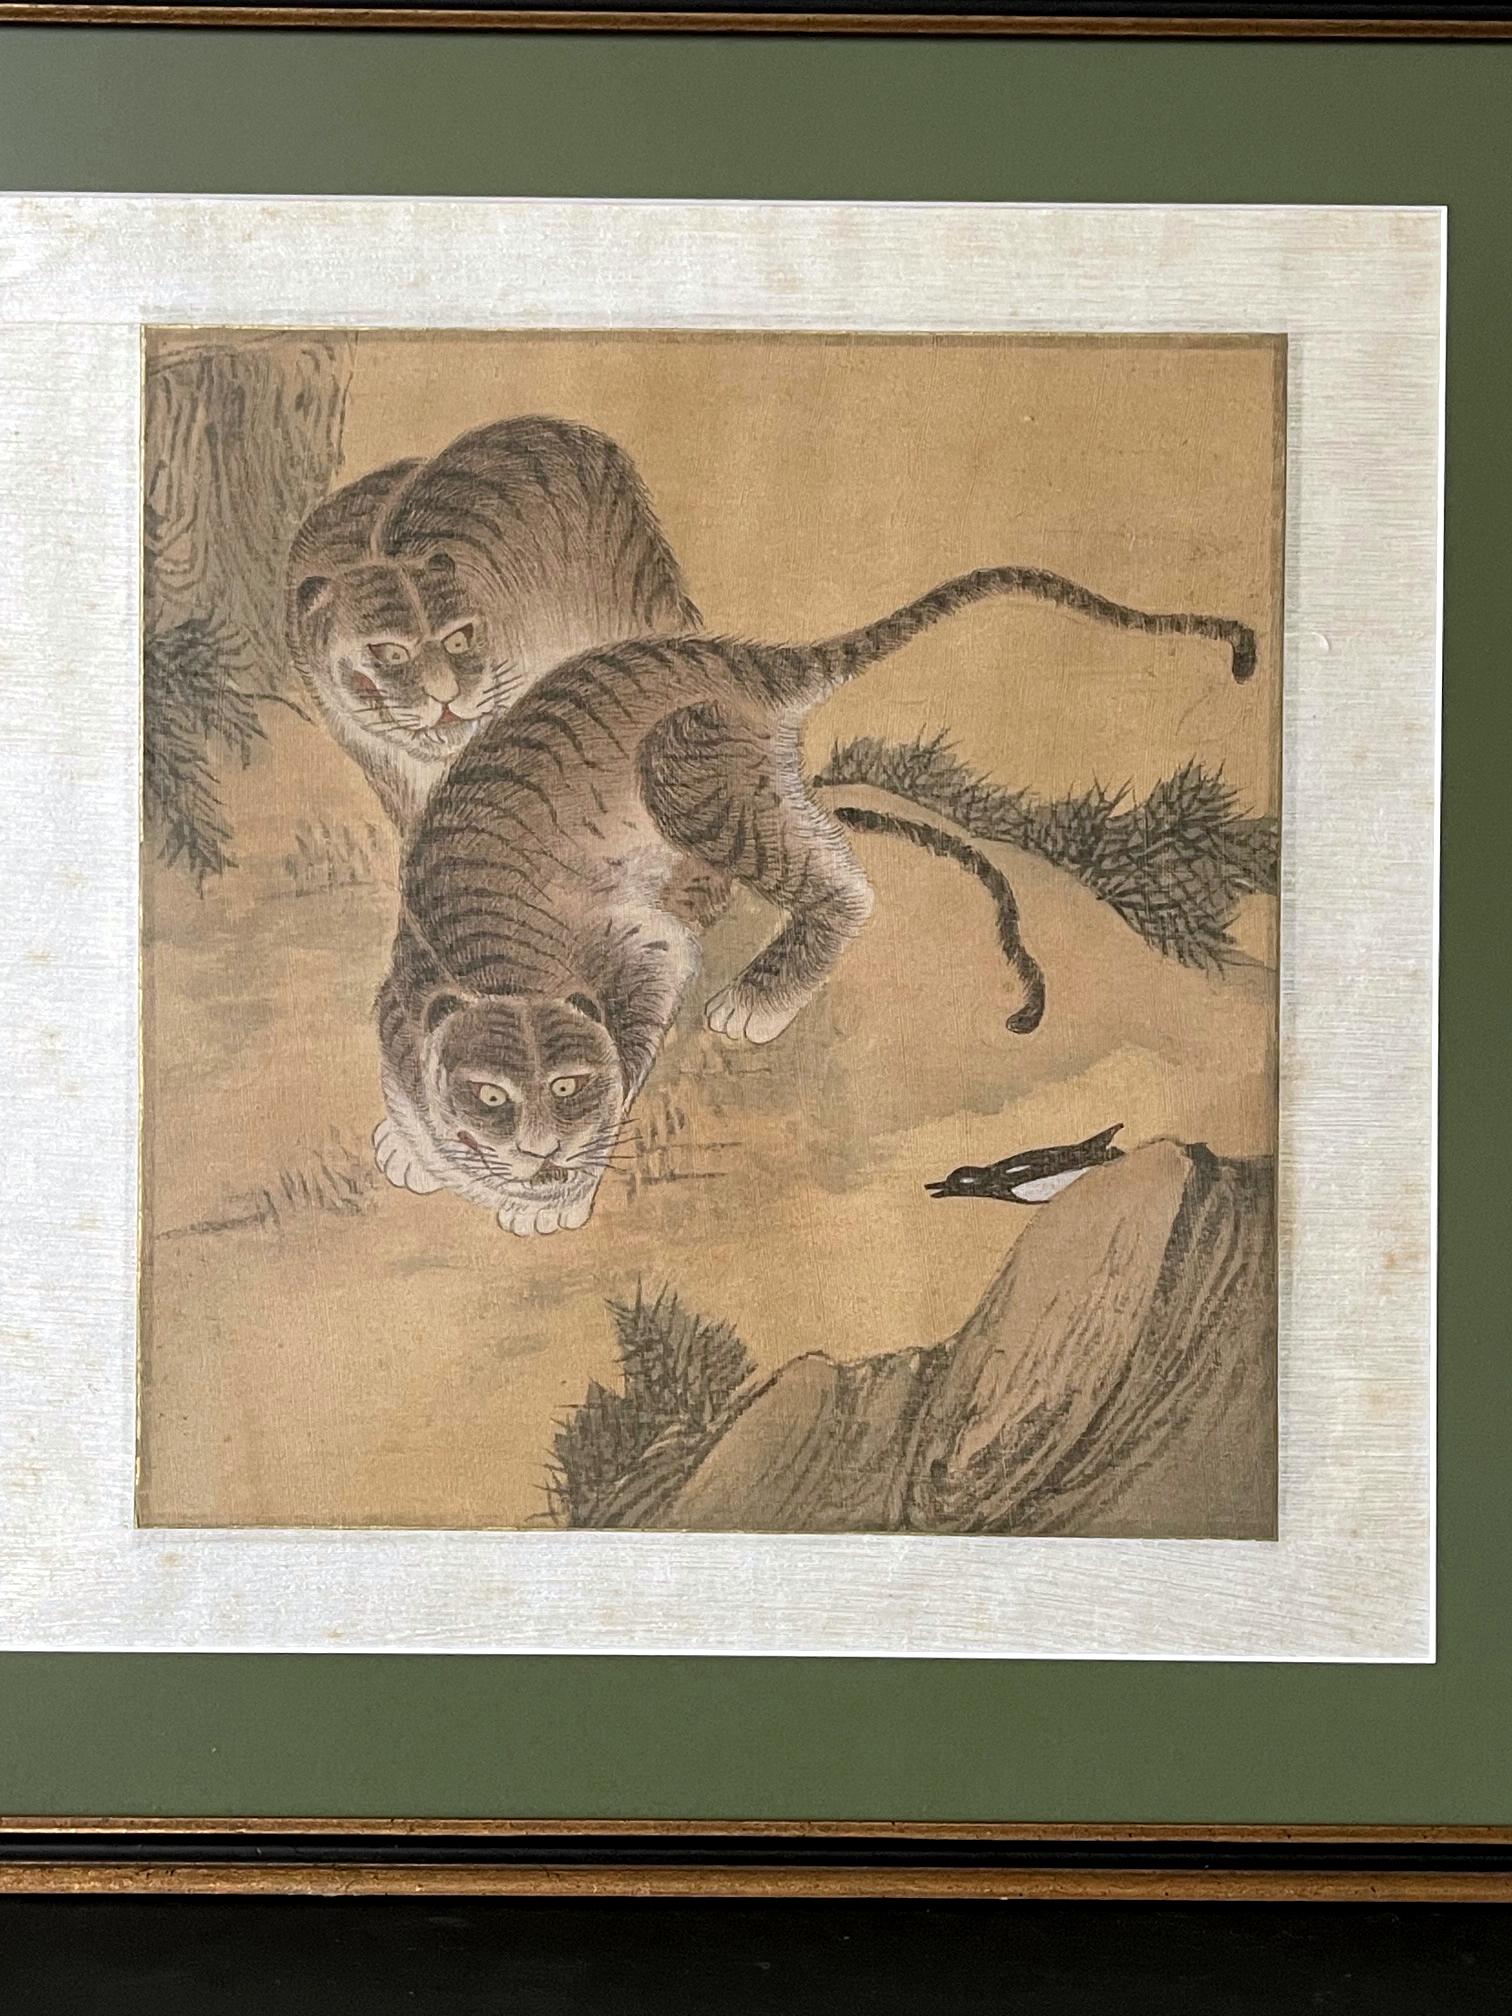 A Korean Folk Art painting watercolor on silk mounted with brocade border and framed. The watercolor was likely dated from late 19th century to the turn of the 20th century, toward the end of Josen Dynasty. The work depicts a 